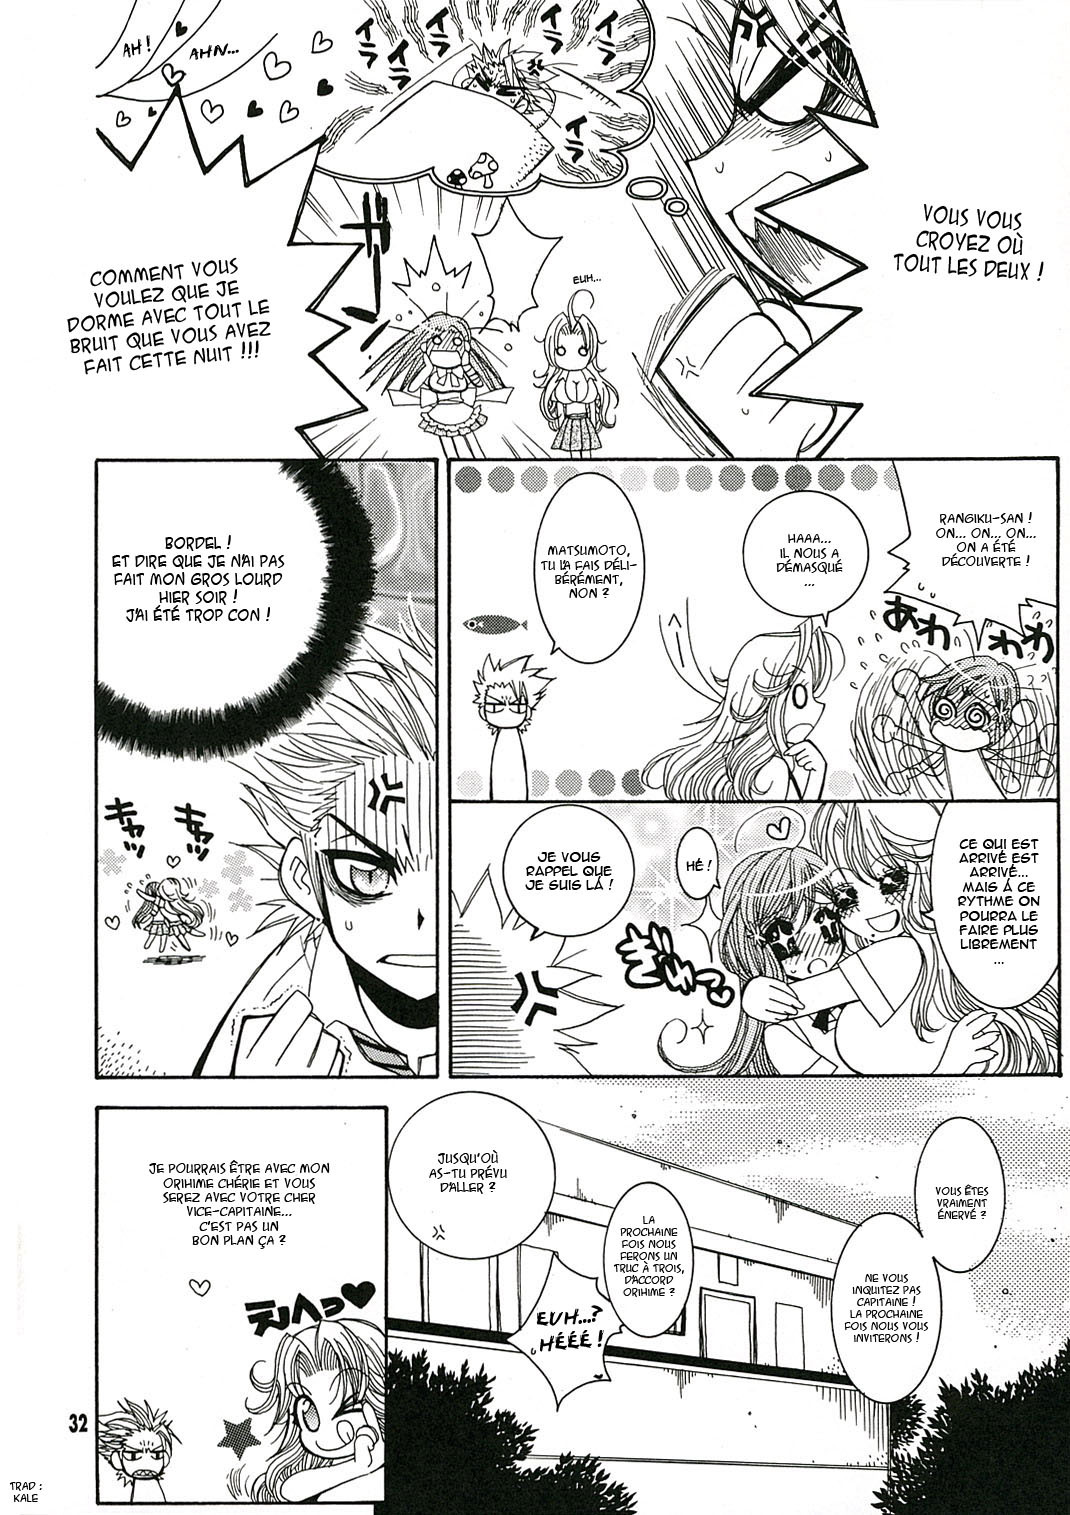 (C70) [SUBSONIC FACTOR (Tajima Ria)] BABY BLUE! (BLEACH) [French] page 31 full